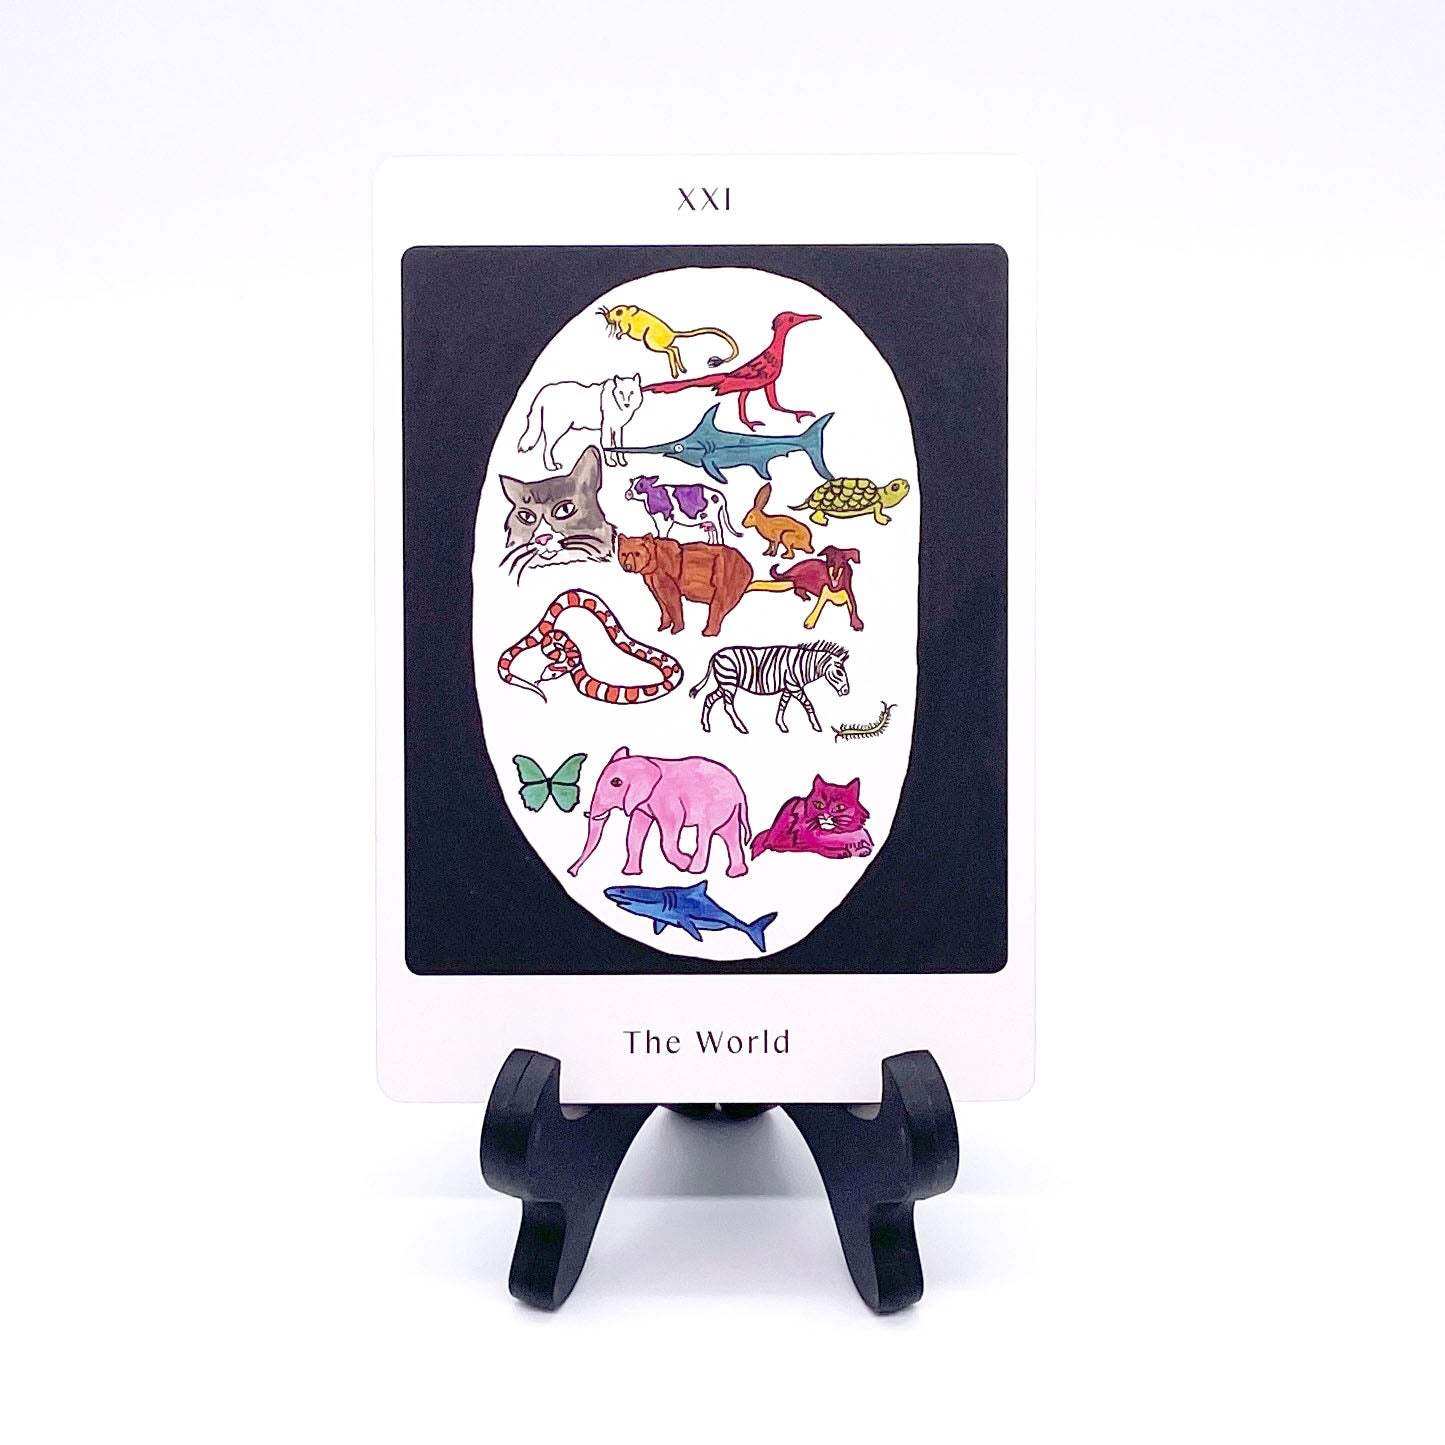 The World card showing a multicolored menagerie of animals in a white oval surrounded by a black background. Card is printed with the title and corresponding Major Arcana number "XXI".